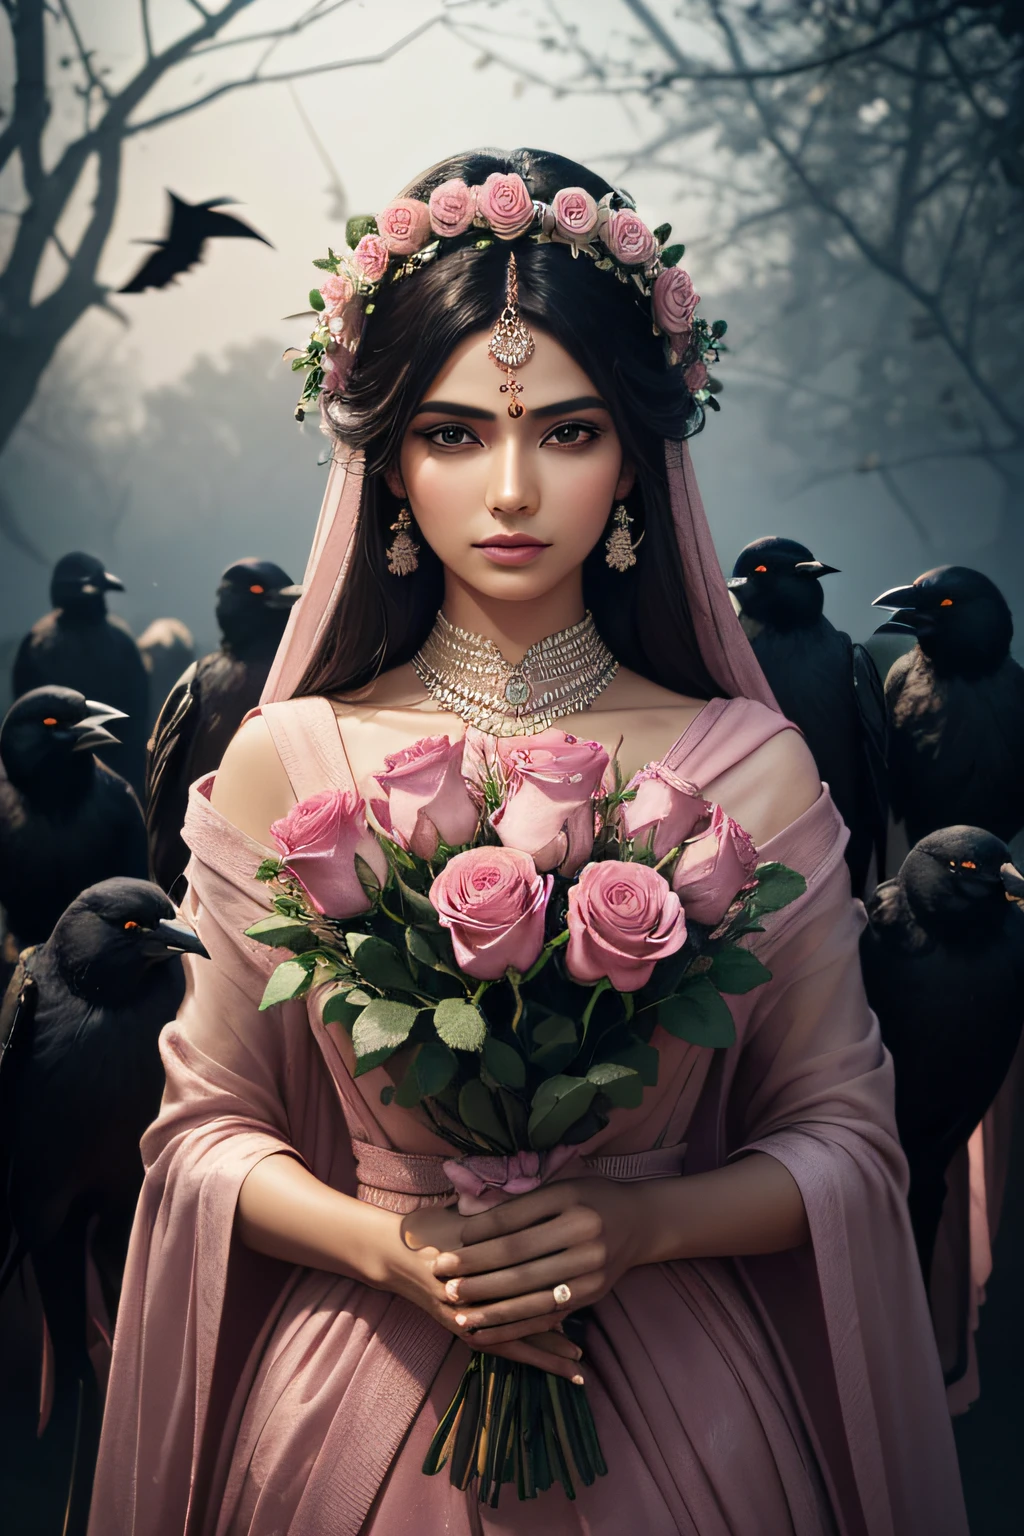 An incredibly detailed close up macro beauty photo of an indian model, hands holding a bouquet of pink roses, surrounded by scary crows from hell. Shot on a Hasselblad medium format camera with a 100mm lens. Unmistakable to a photograph. Cinematic lighting. Photographed by Tim Walker, trending on 500px –ar 4:5 –s 750 –niji 5 –v 5 –q2